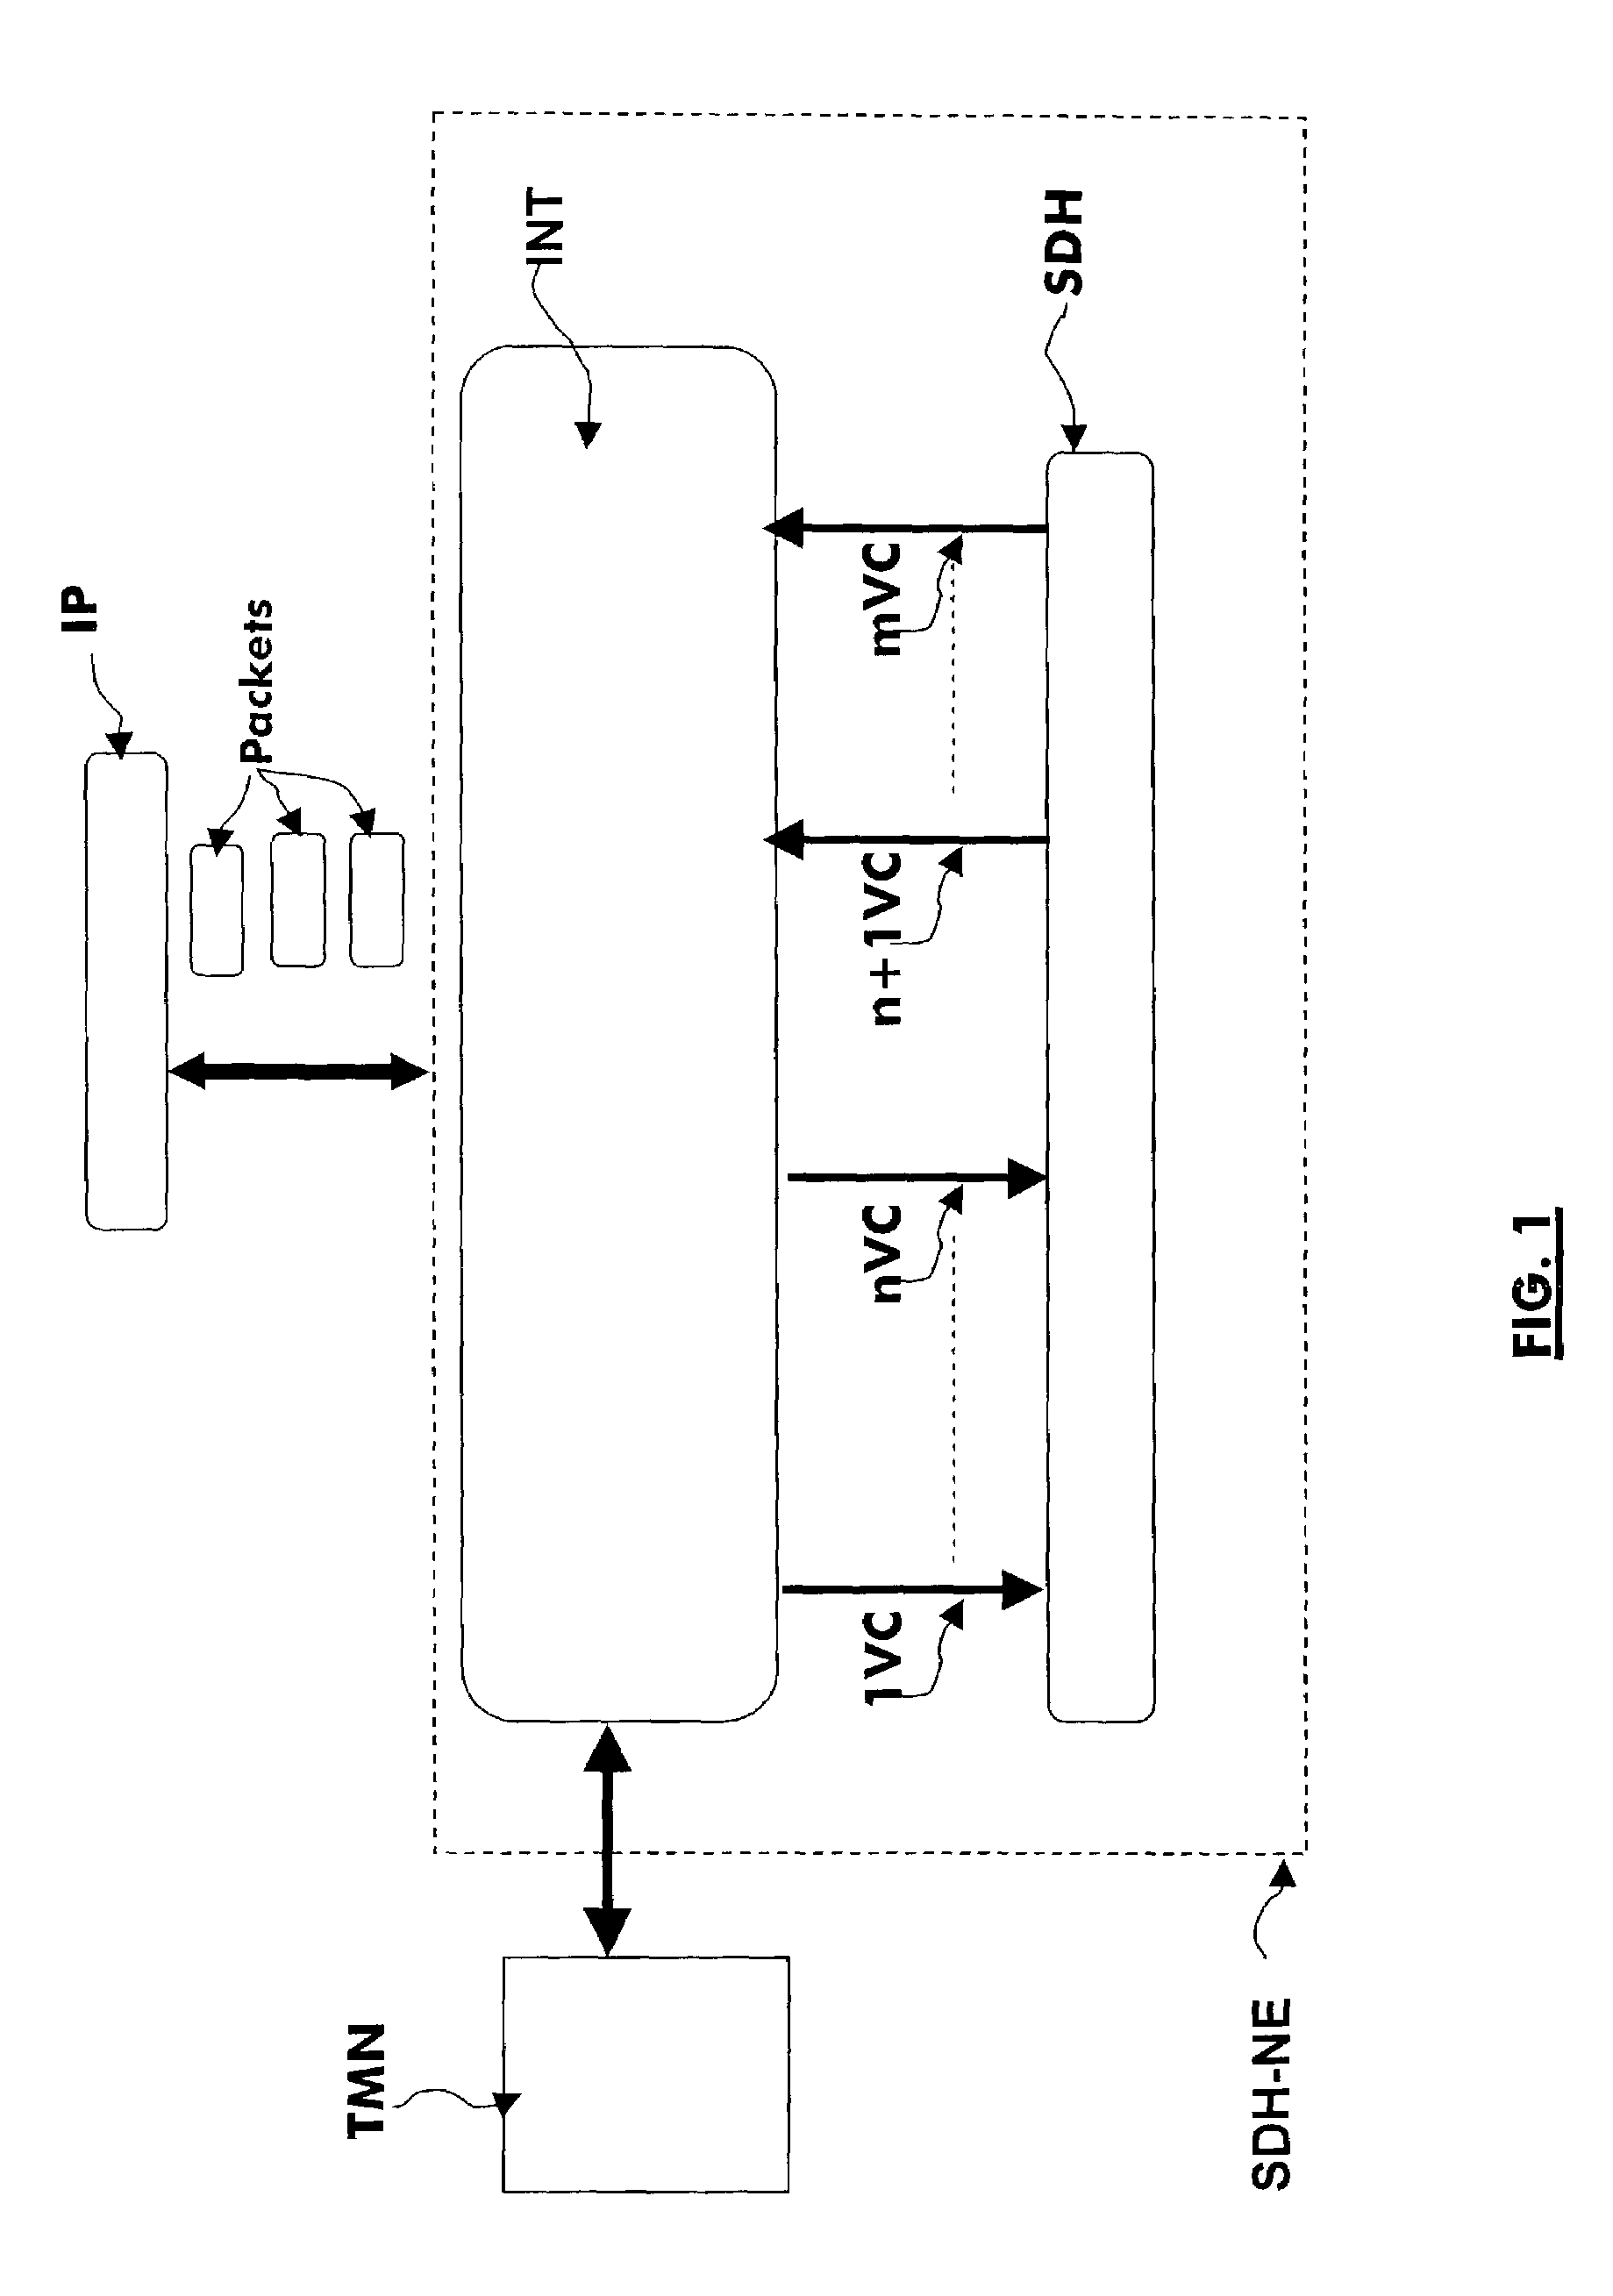 Method and apparatus for obtaining a scalable and managed bandwidth for connections between asynchronous level and synchronous hierarchy level in a telecommunication network